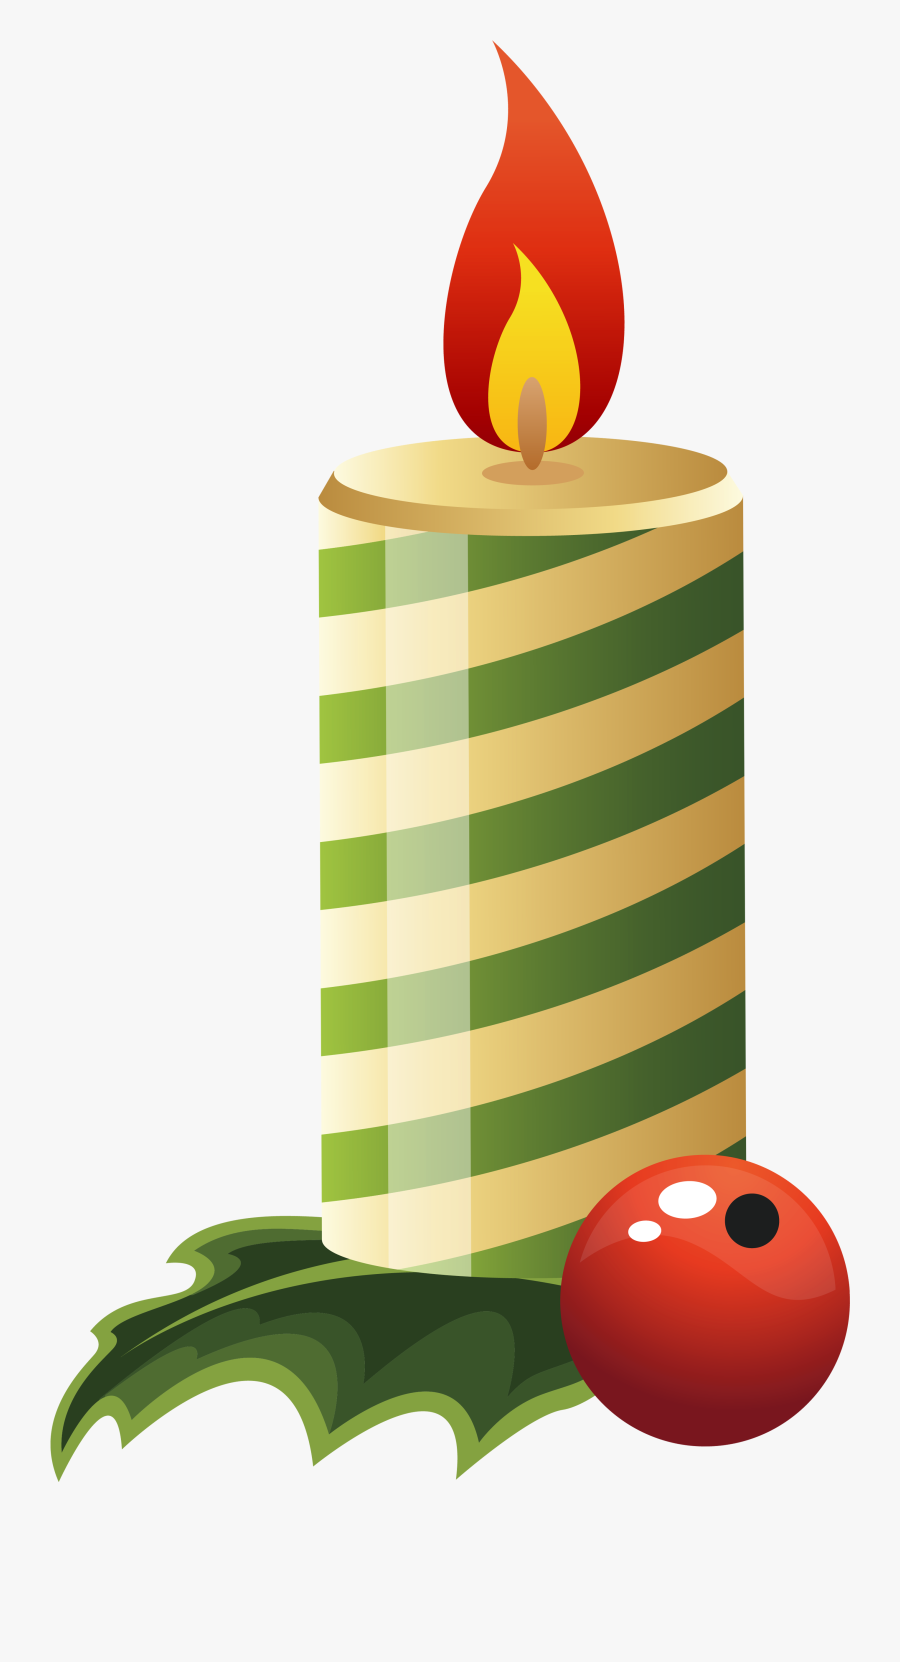 Green Christmas Candle Png Clipart Image - Candle Lamp Clipart Christmas, Transparent Clipart